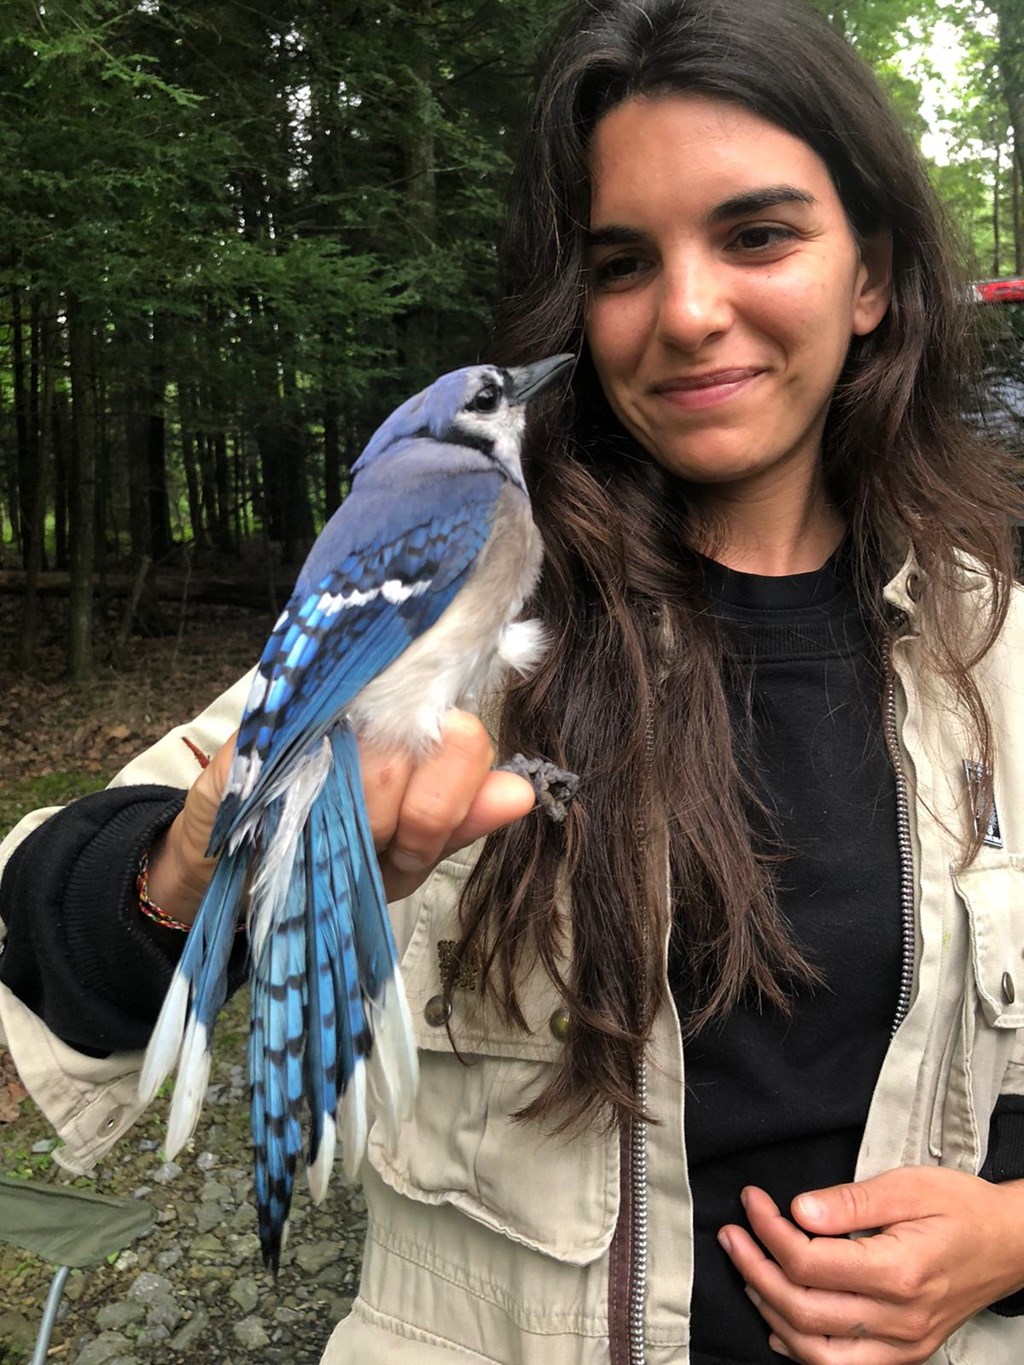 Tamara Russo with banded bluejay